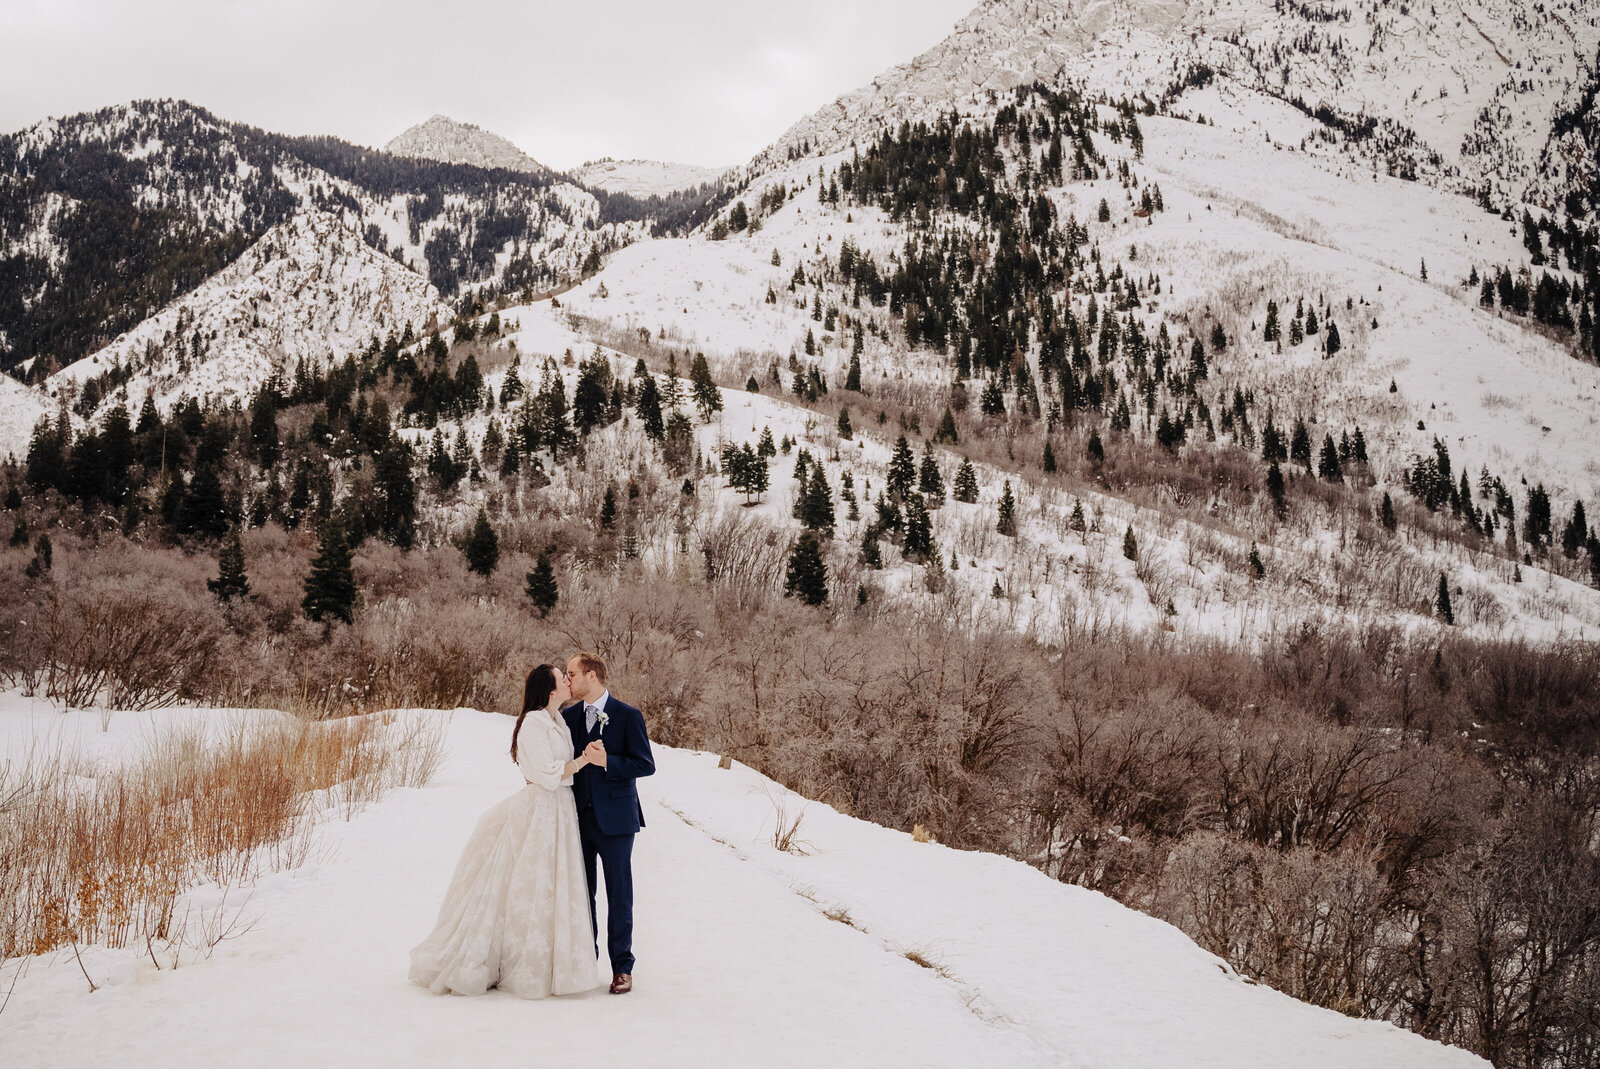 Bride and groom kiss surrounded by a snowy mountain backdrop filled with pine trees. Photo taken by Orlando Wedding Photographer Four Loves Photo and Film.